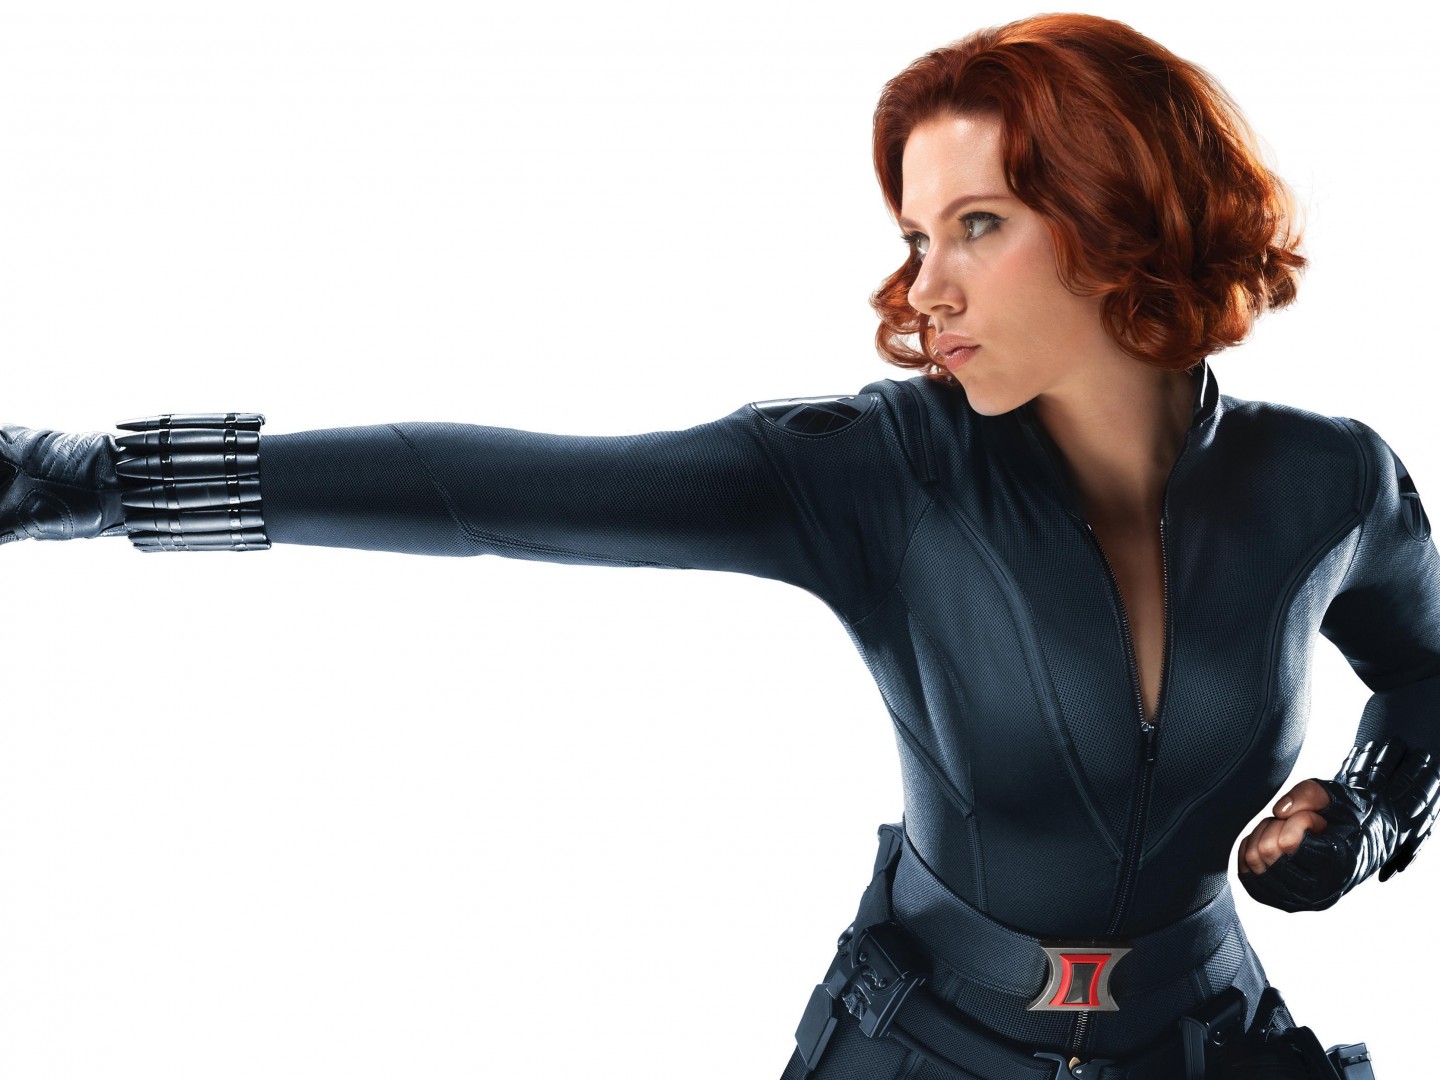 Cute child star transforms into sexy black widow?How does Scarlett rely on the 